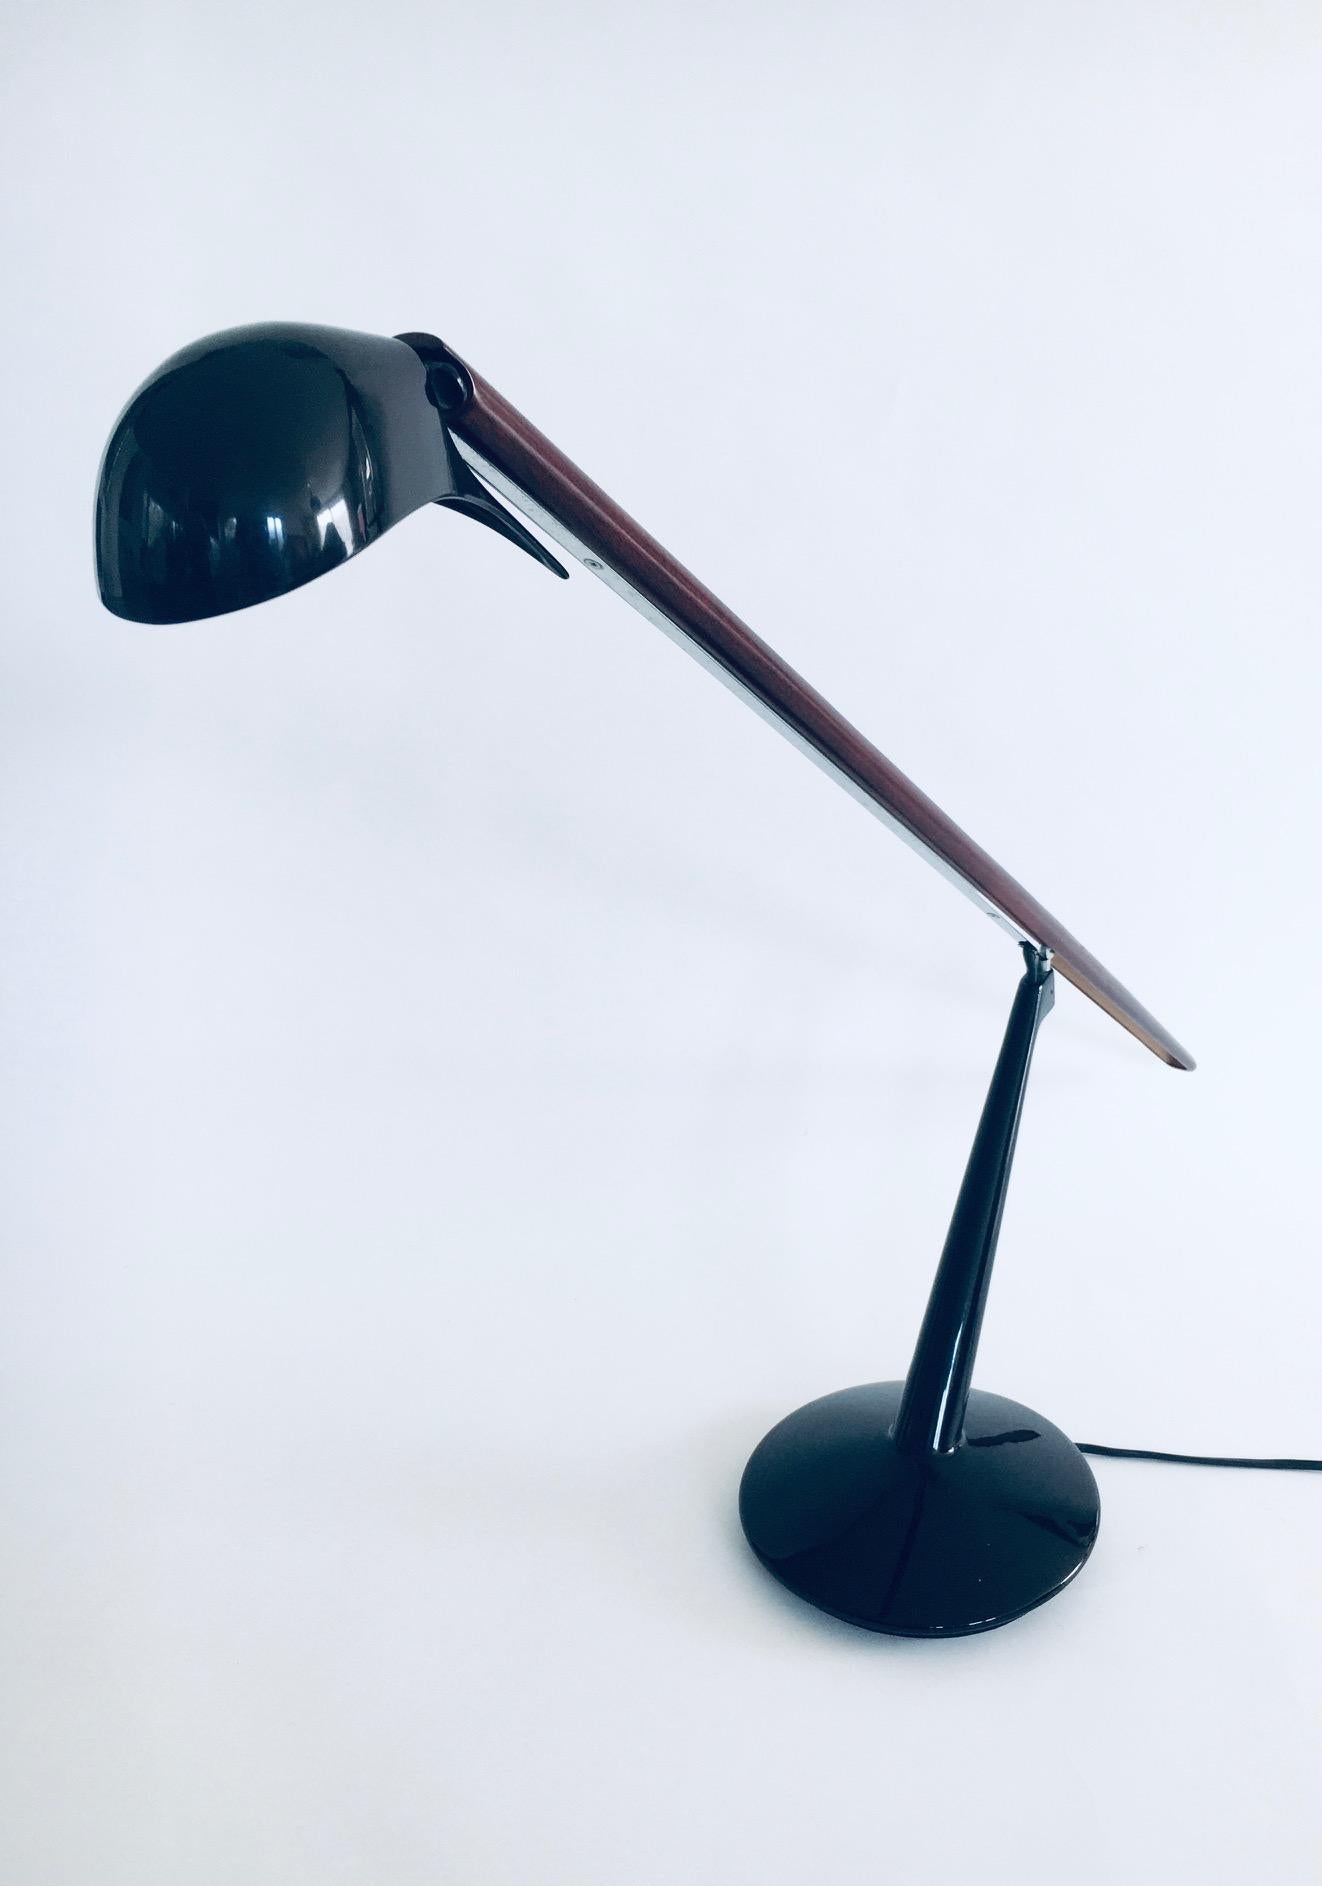 Late 20th Century Postmodern Design 'Bluebird' Desk Lamp by Jorge Pensi for B. Lux, 1990's Spain For Sale